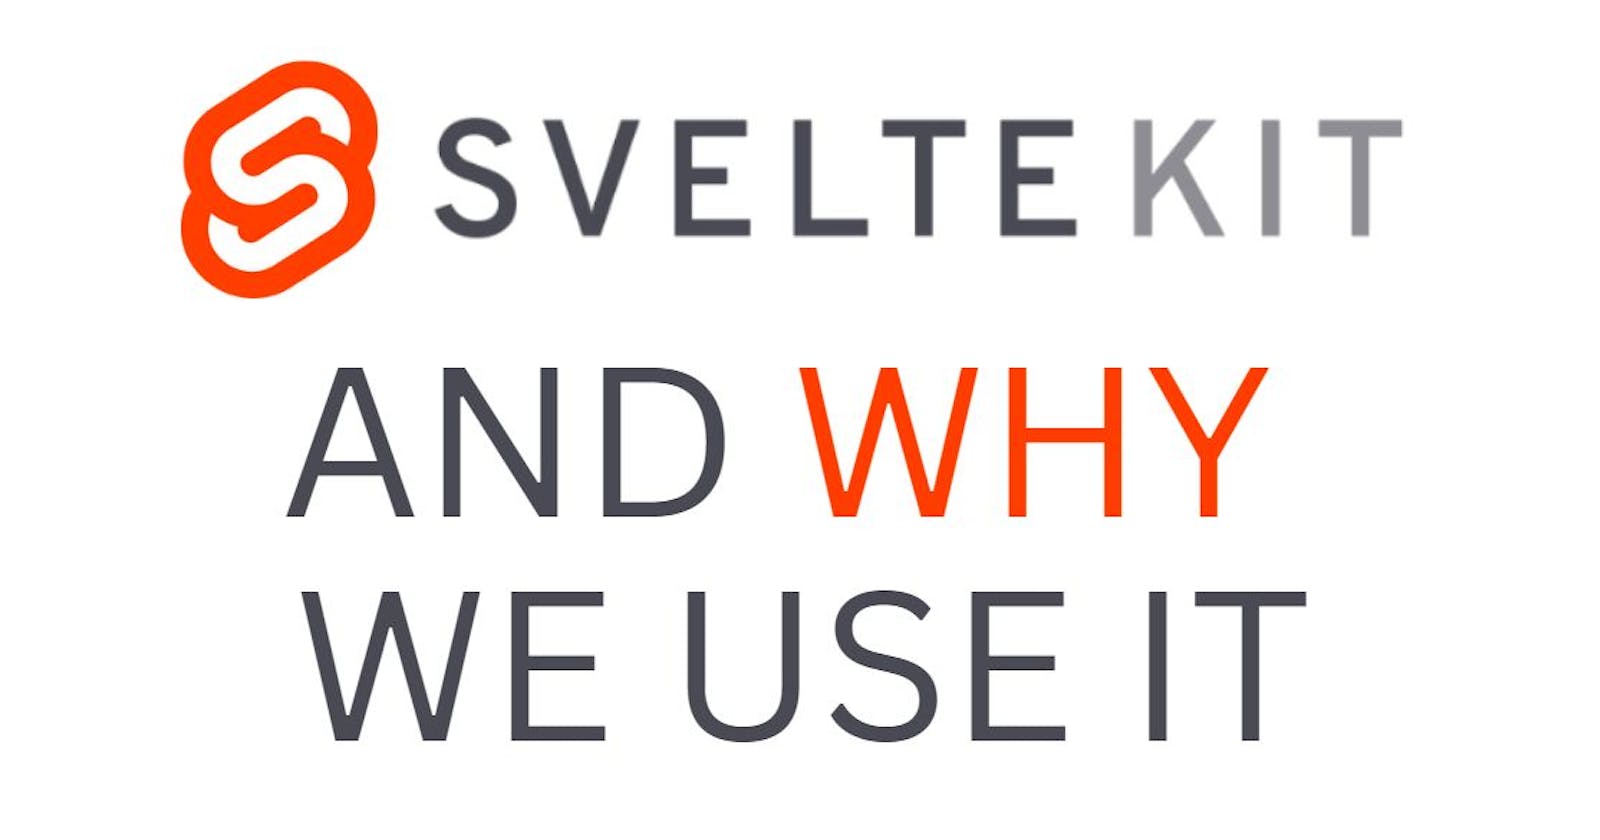 What is SvelteKit? And Why Should You Care?